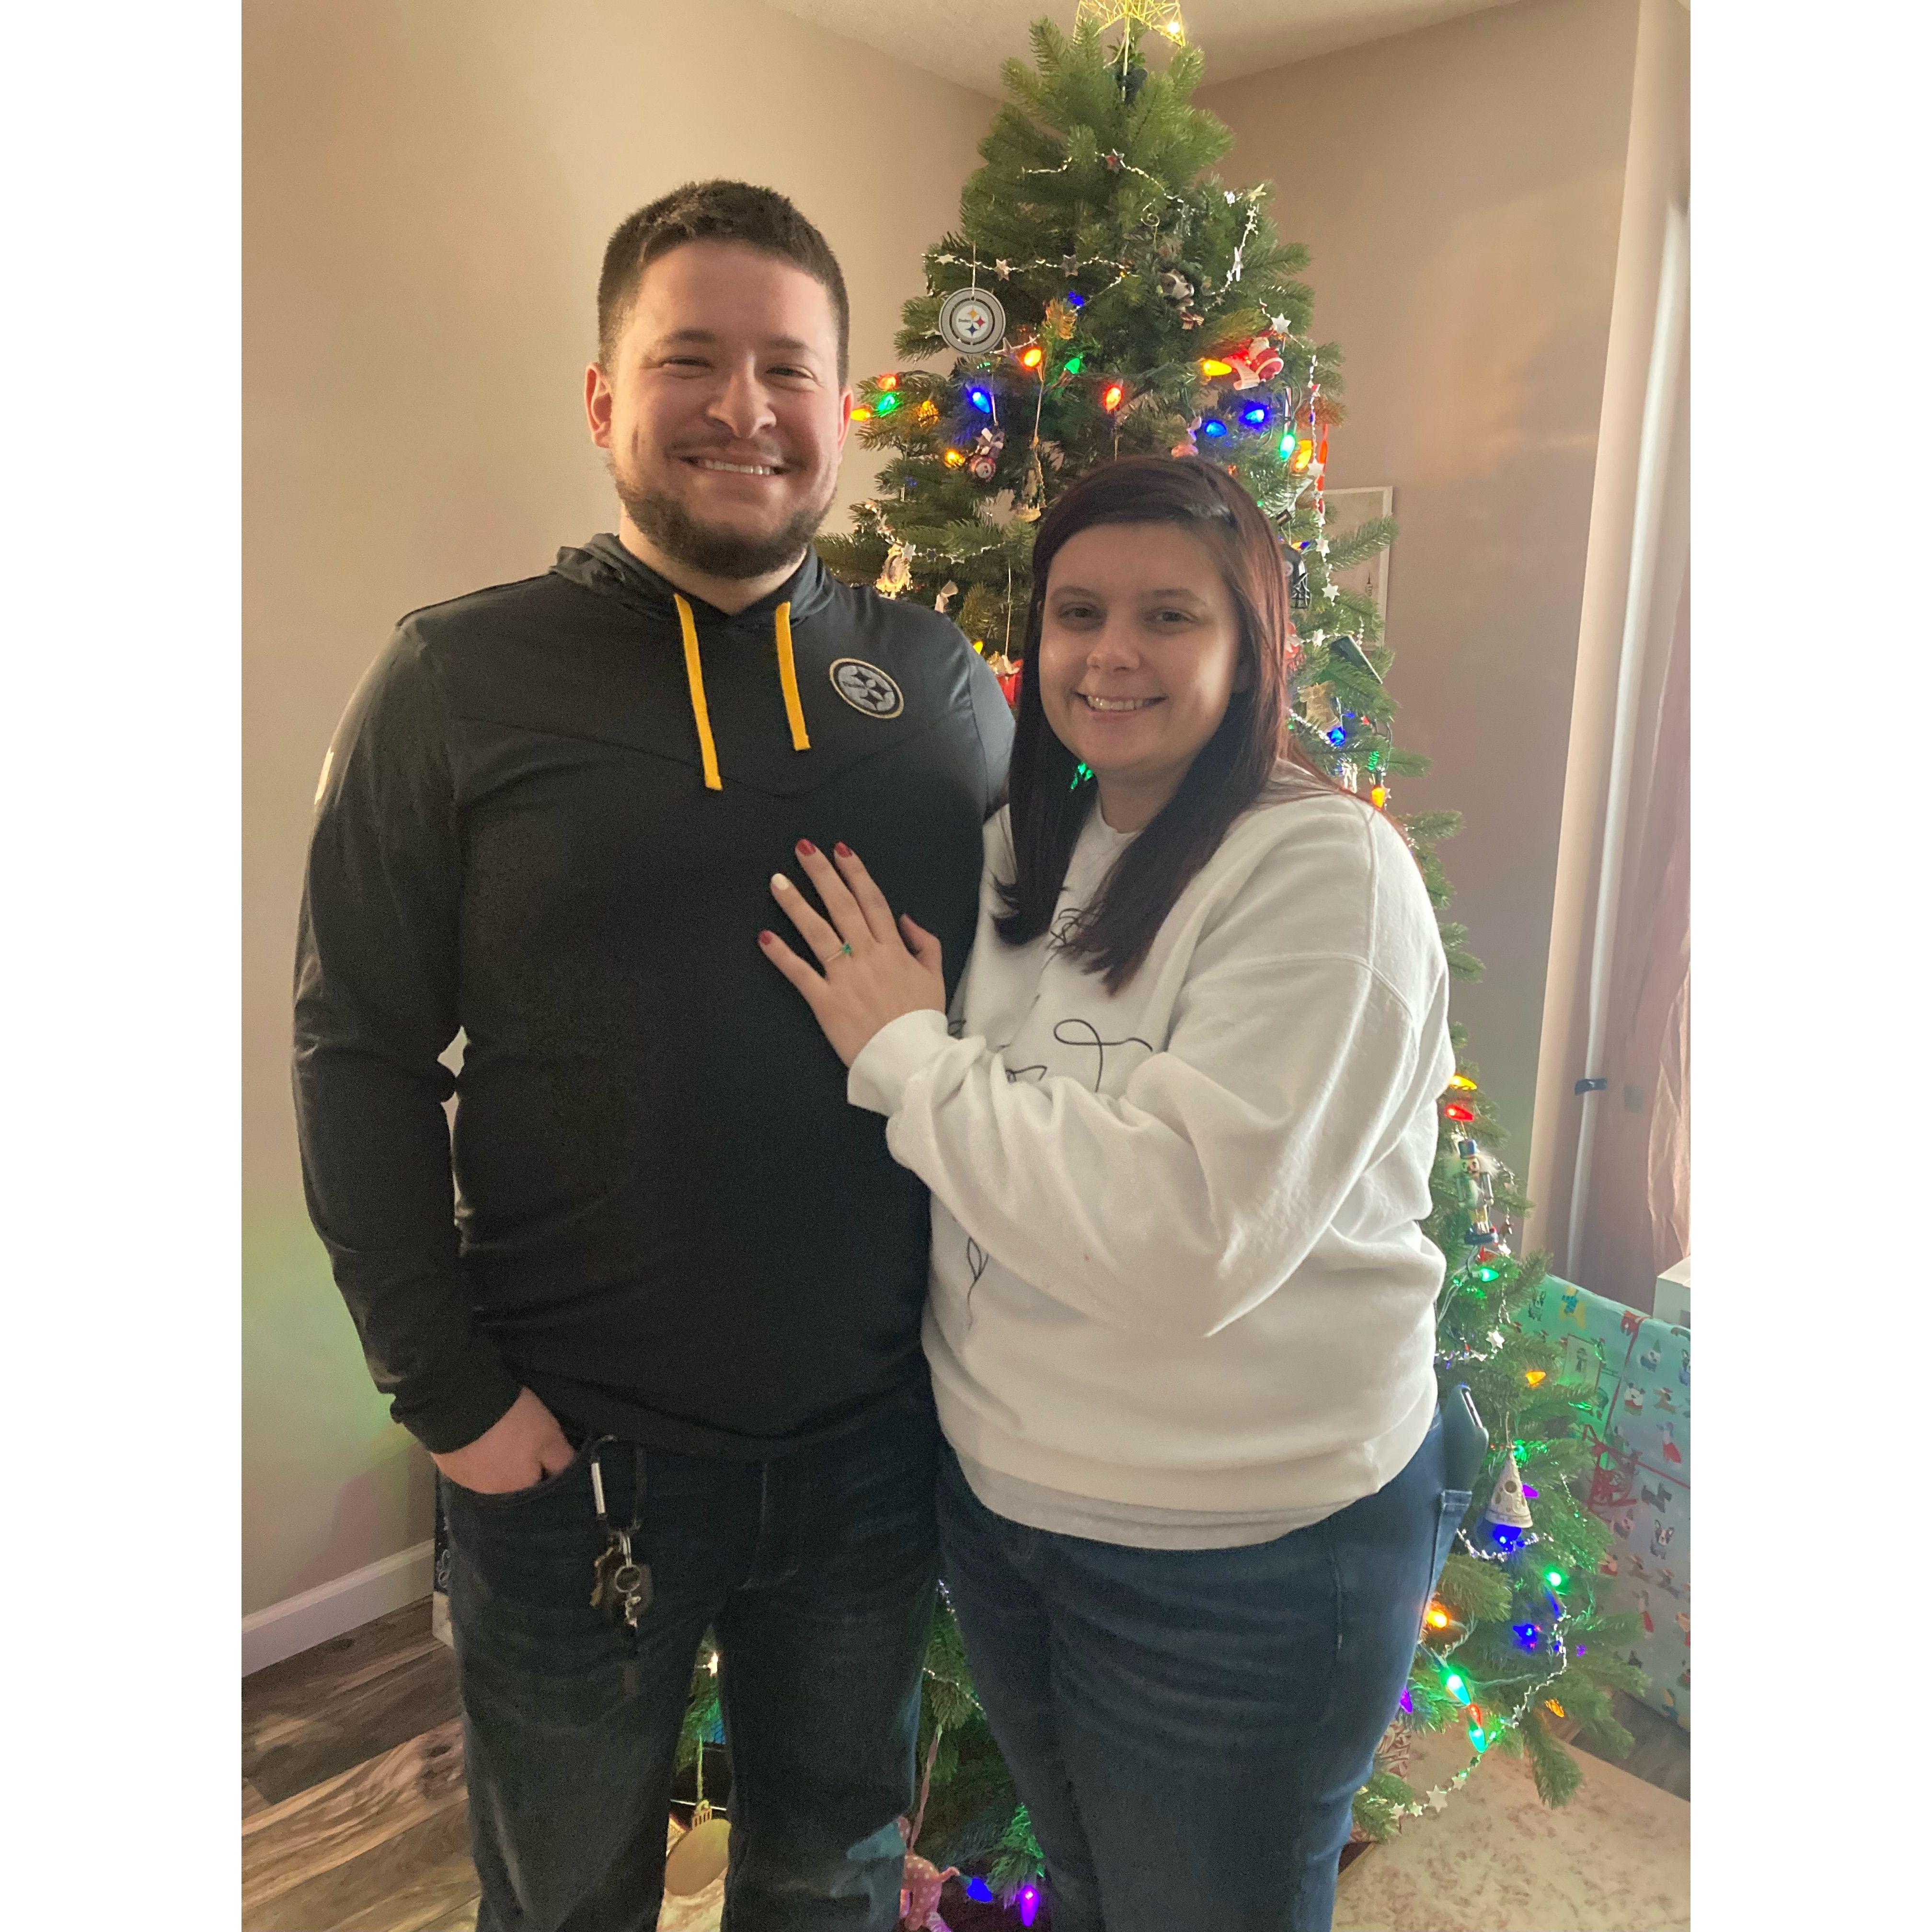 Our first and only Christmas as an engaged couple!